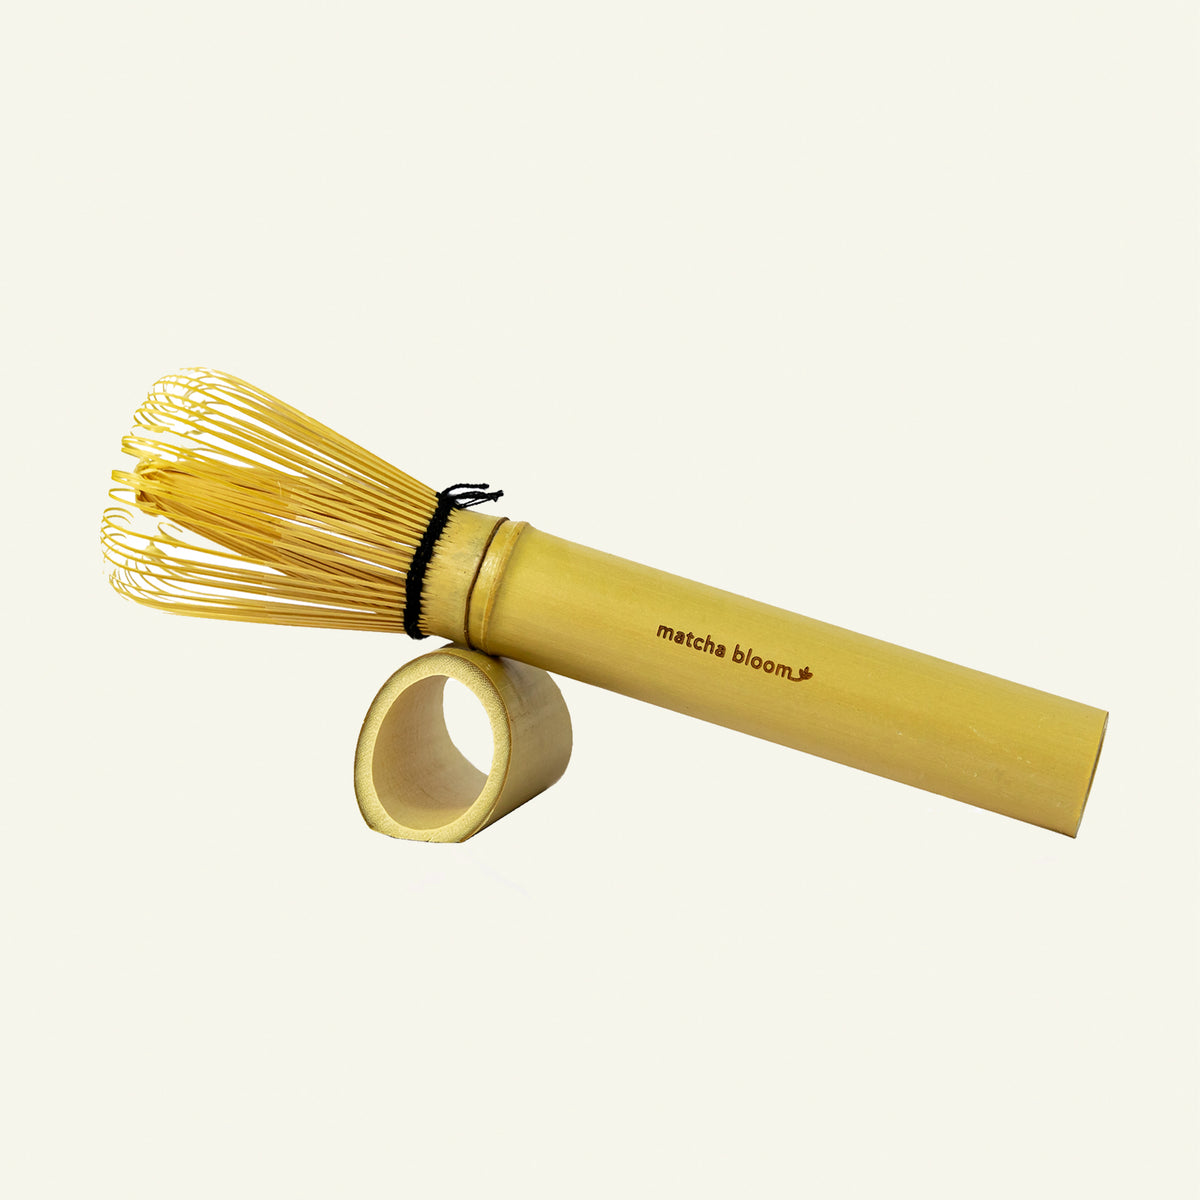 Japanese Style Bamboo Matcha Whisk For Sale